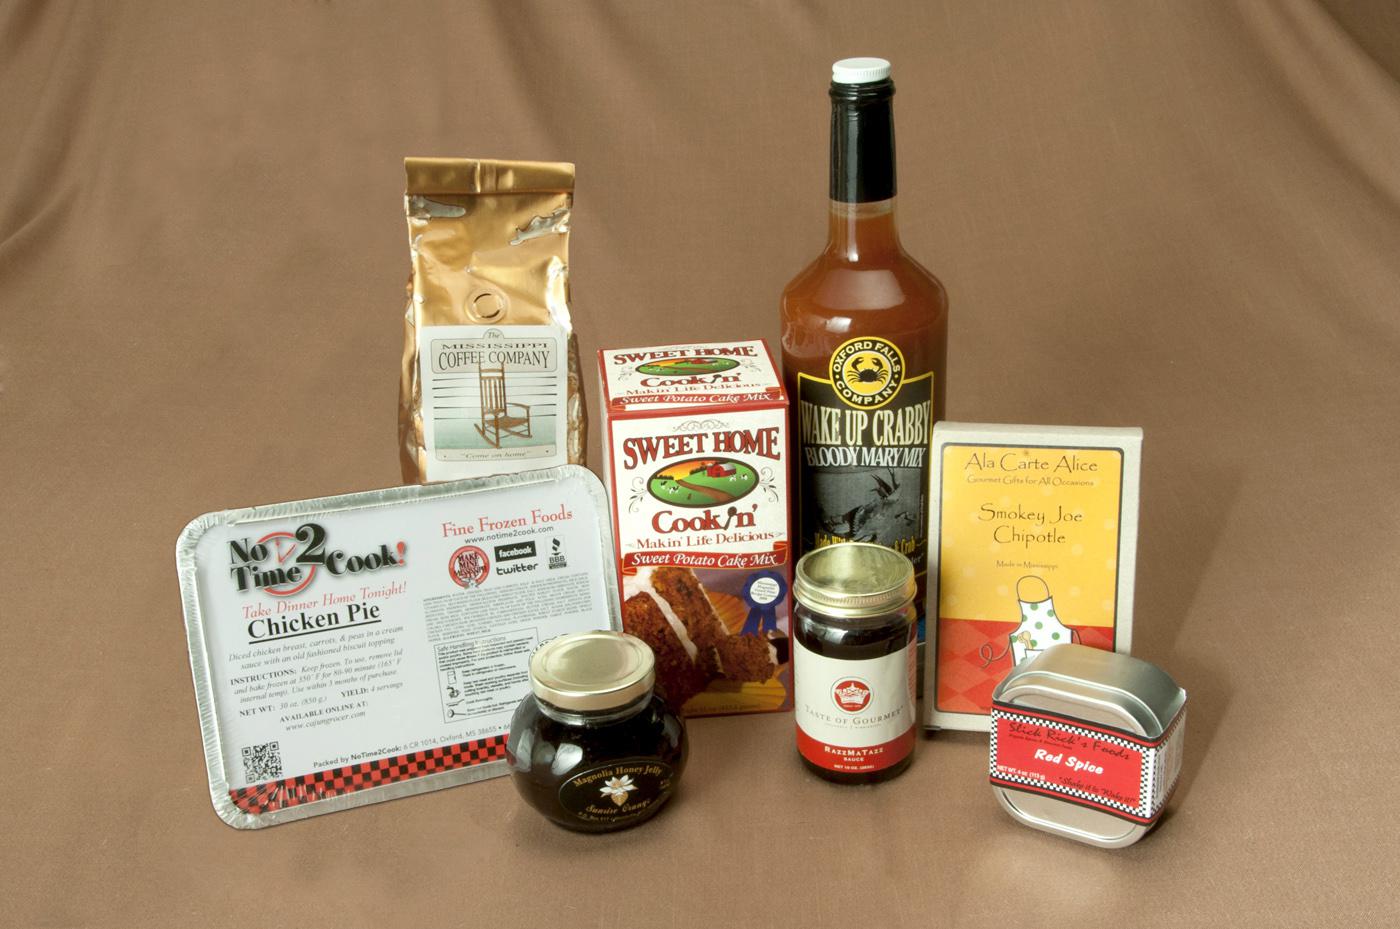 Many Mississippi cooks have turned their favorite recipes into retail products with information from Mississippi State University's business and Extension Service experts. (Photo by Kat Lawrence)